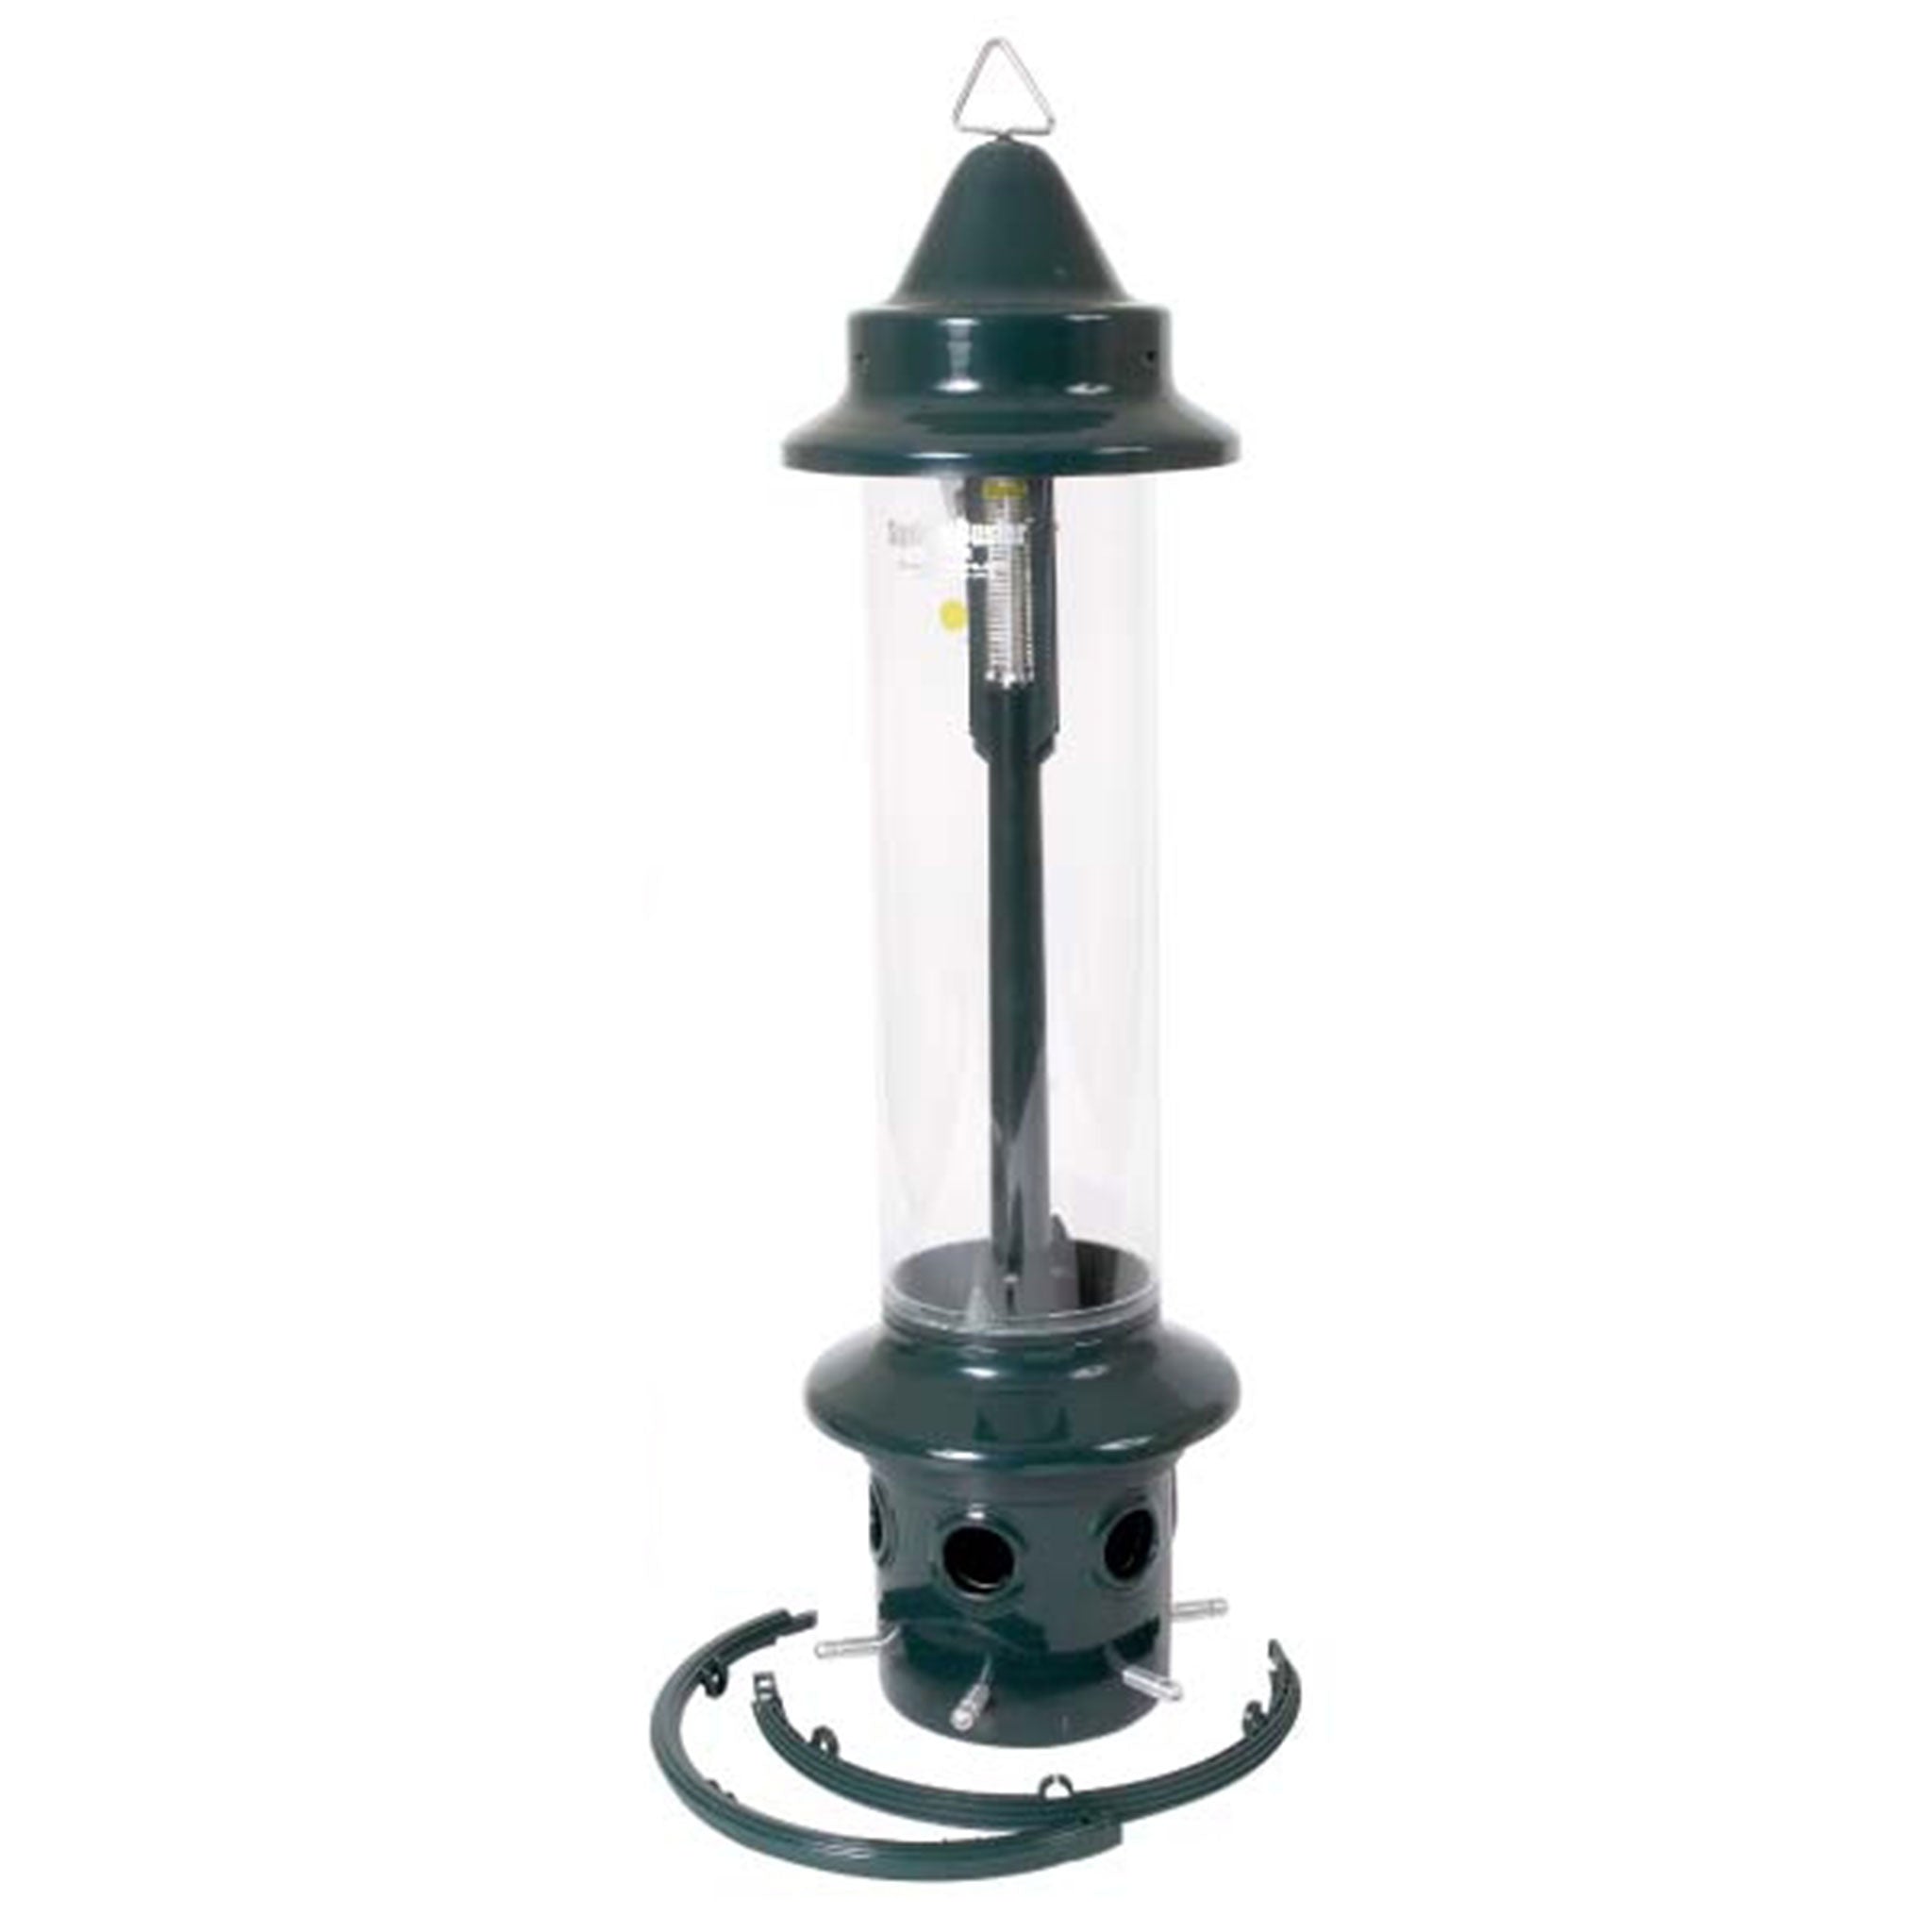 Squirrel Buster Plus Seed Feeder on white background